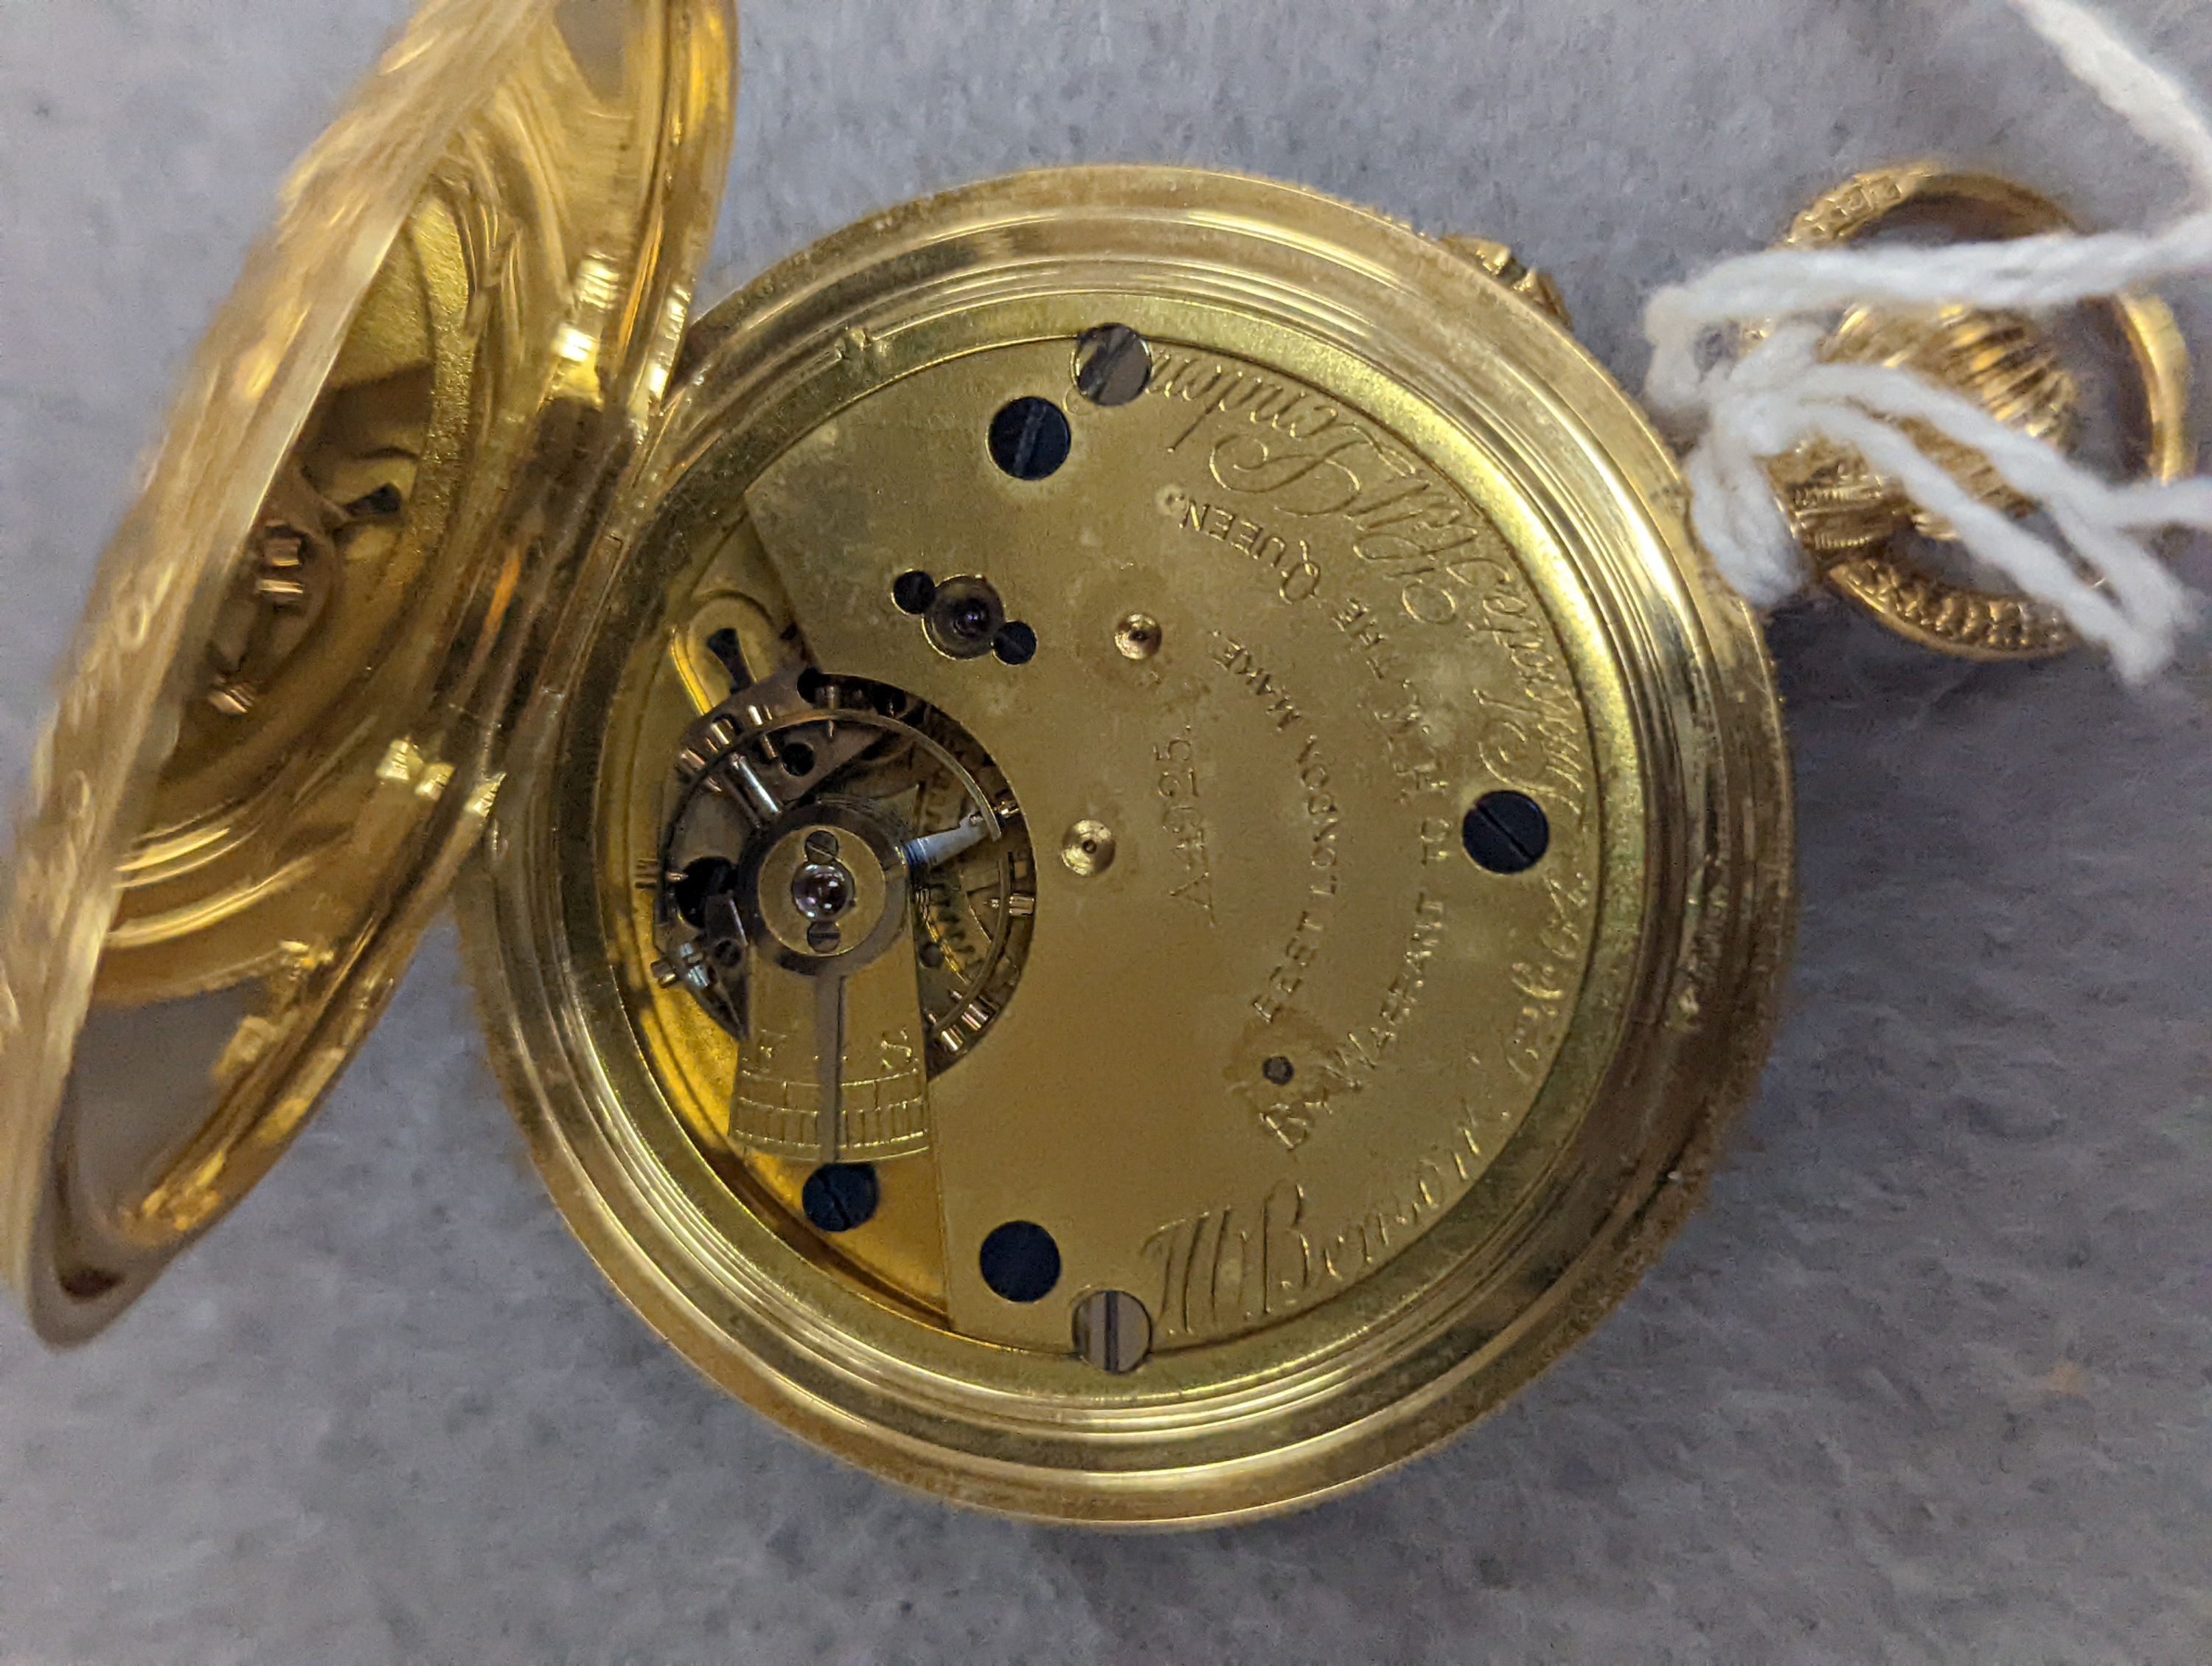 An Edwardian engraved 18ct gold half hunter keyless pocket watch, by J.W. Benson, with Roman dial and subsidiary seconds